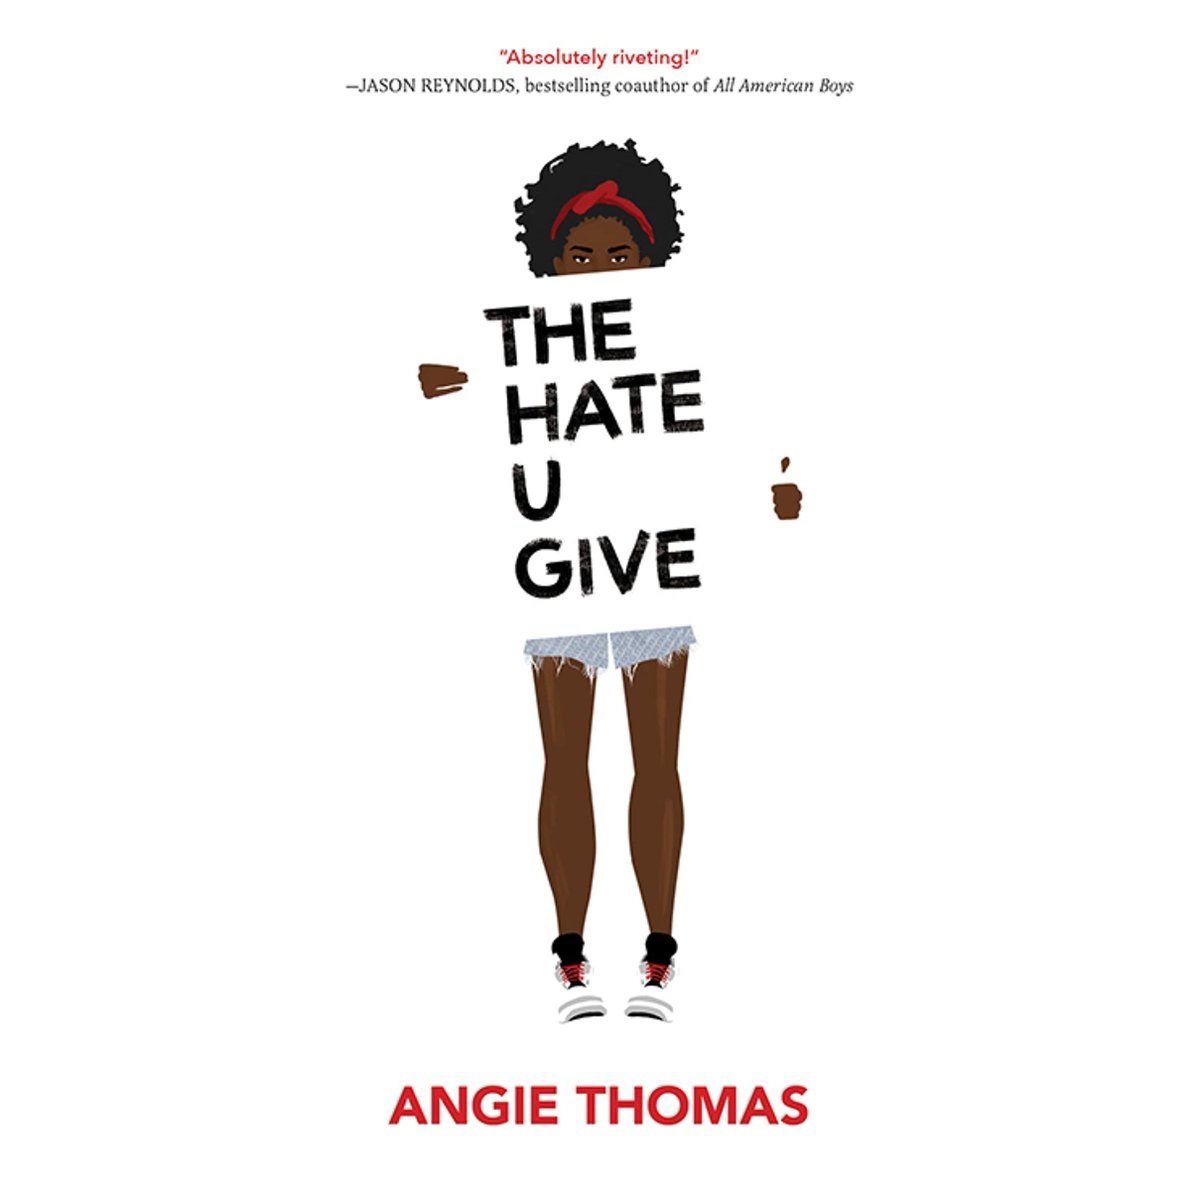 The English Dept. have selected April's Books of the Month:
The Hate U Give by Angie Thomas
Travellers in the Third Reich by Julia Boyd.
Pupils will receive 5 achievement points if they read a book and can talk to a member of staff about it. #WeAreStJames #excellence https://t.co/b3mAVYT8Ah